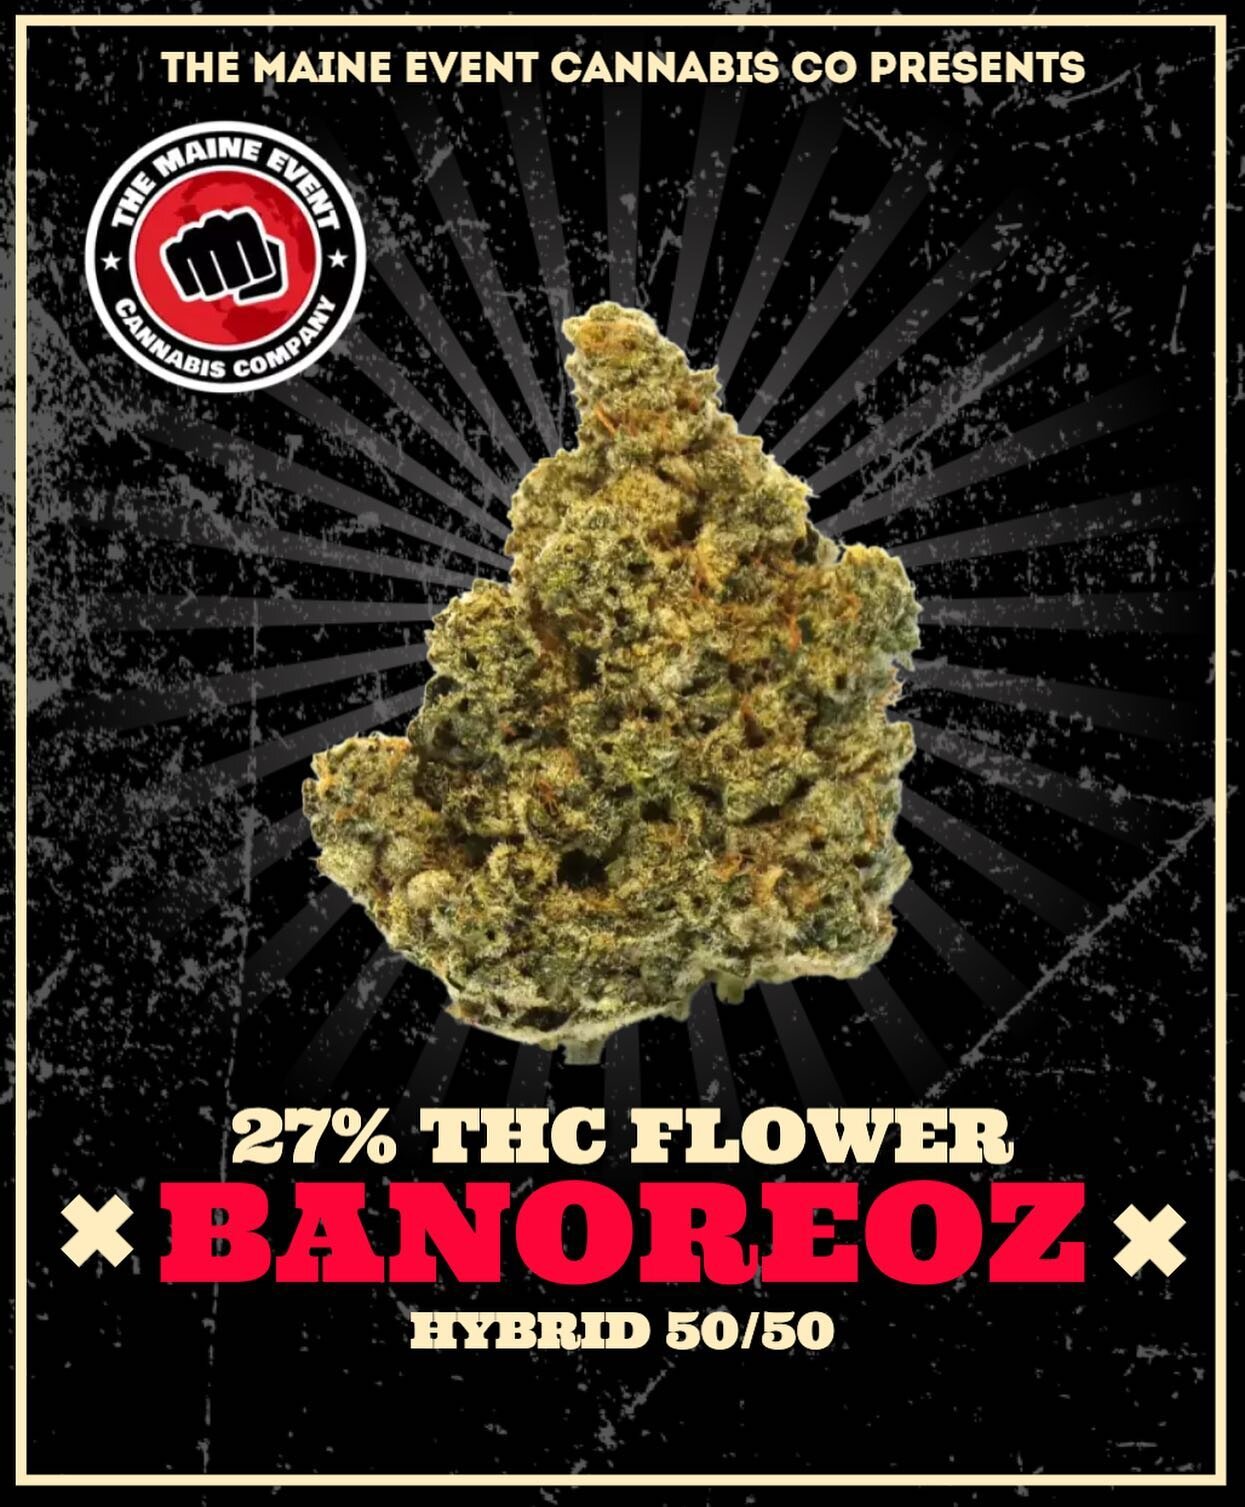 Banoreoz is a hybrid Indica dominant cross between Oreoz &amp; Duel OG bred by highly respected local breeder Honey Sticks Genetics. Banoreoz has a pleasantly sweet &amp; creamy aroma with subtle notes of funk, berry, and pine.

#stoned #community #g